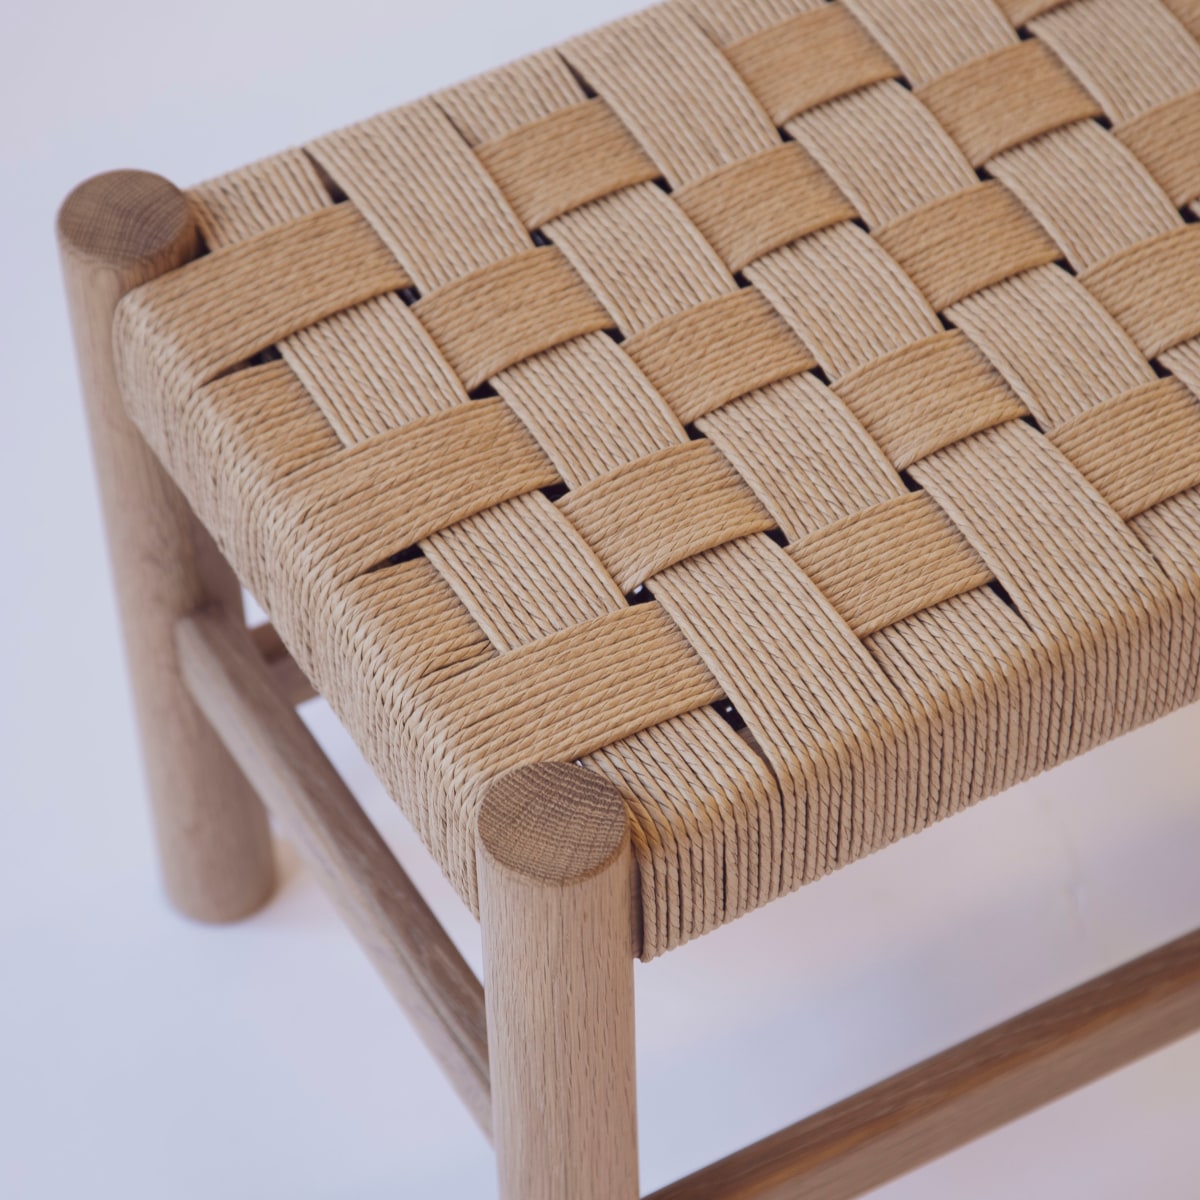 My project in Furniture Design: Introduction to Danish Cord